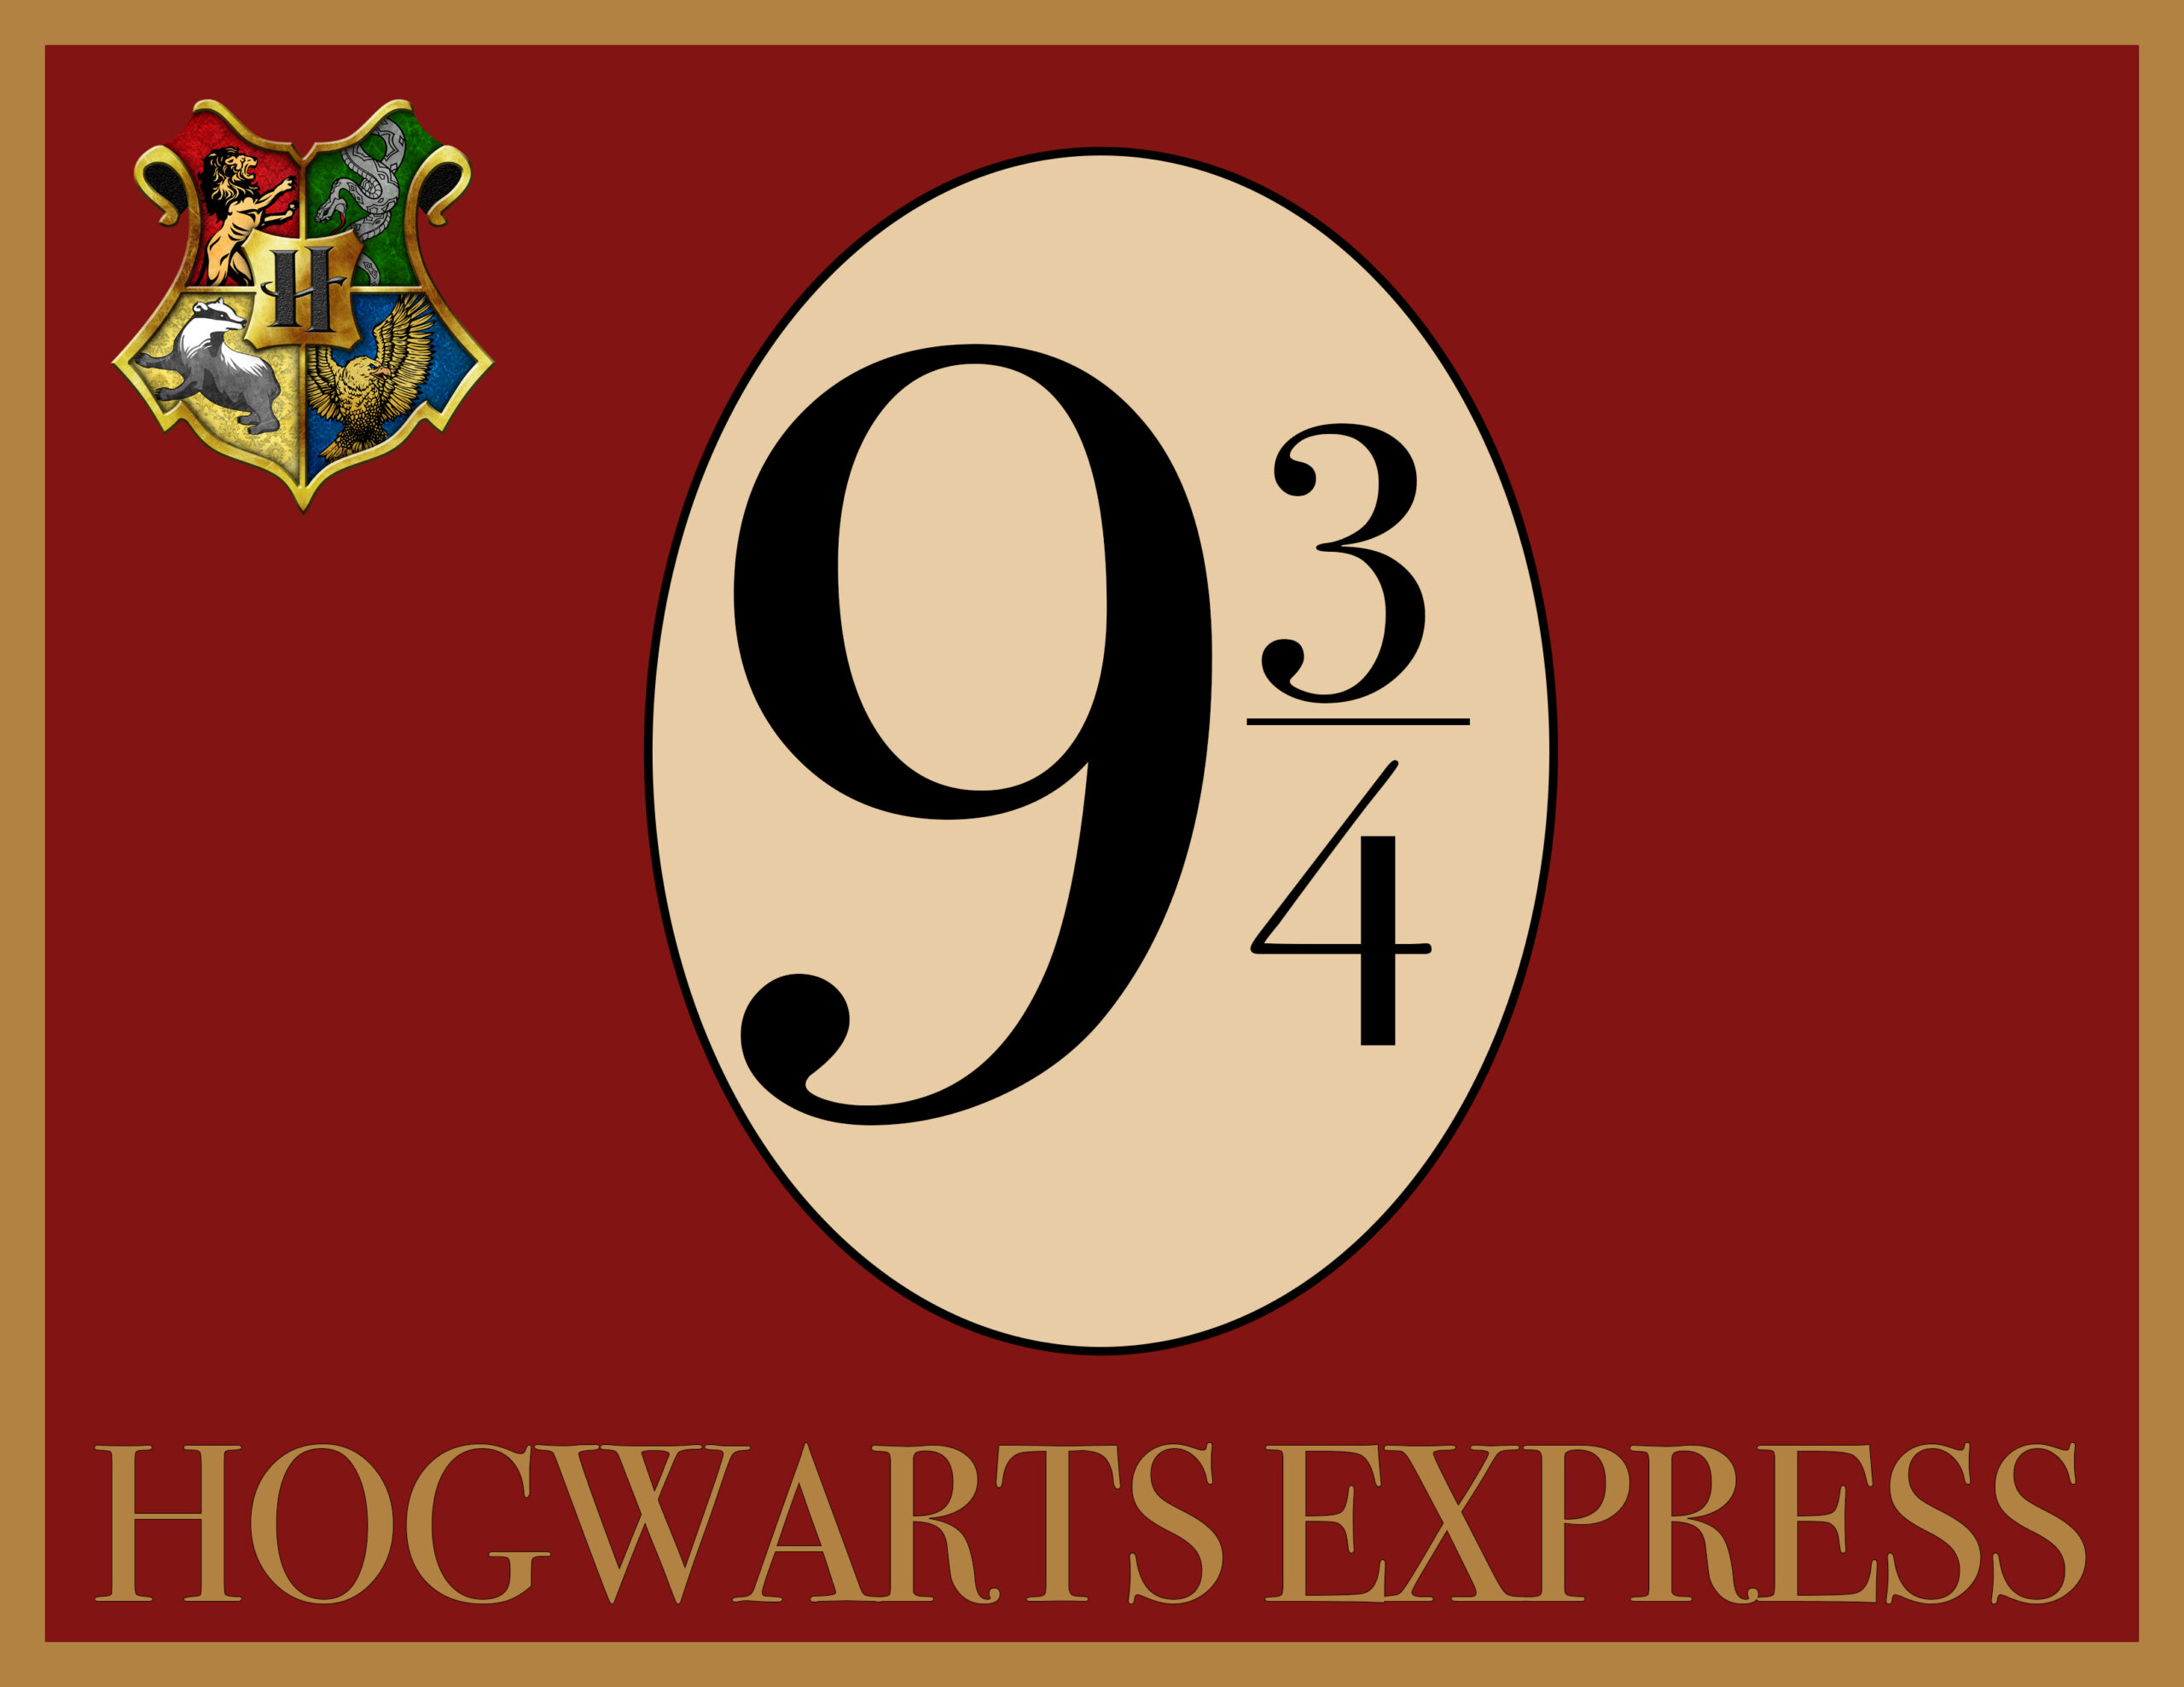 Free Harry Potter Printables And Decorations Jonesing2Create